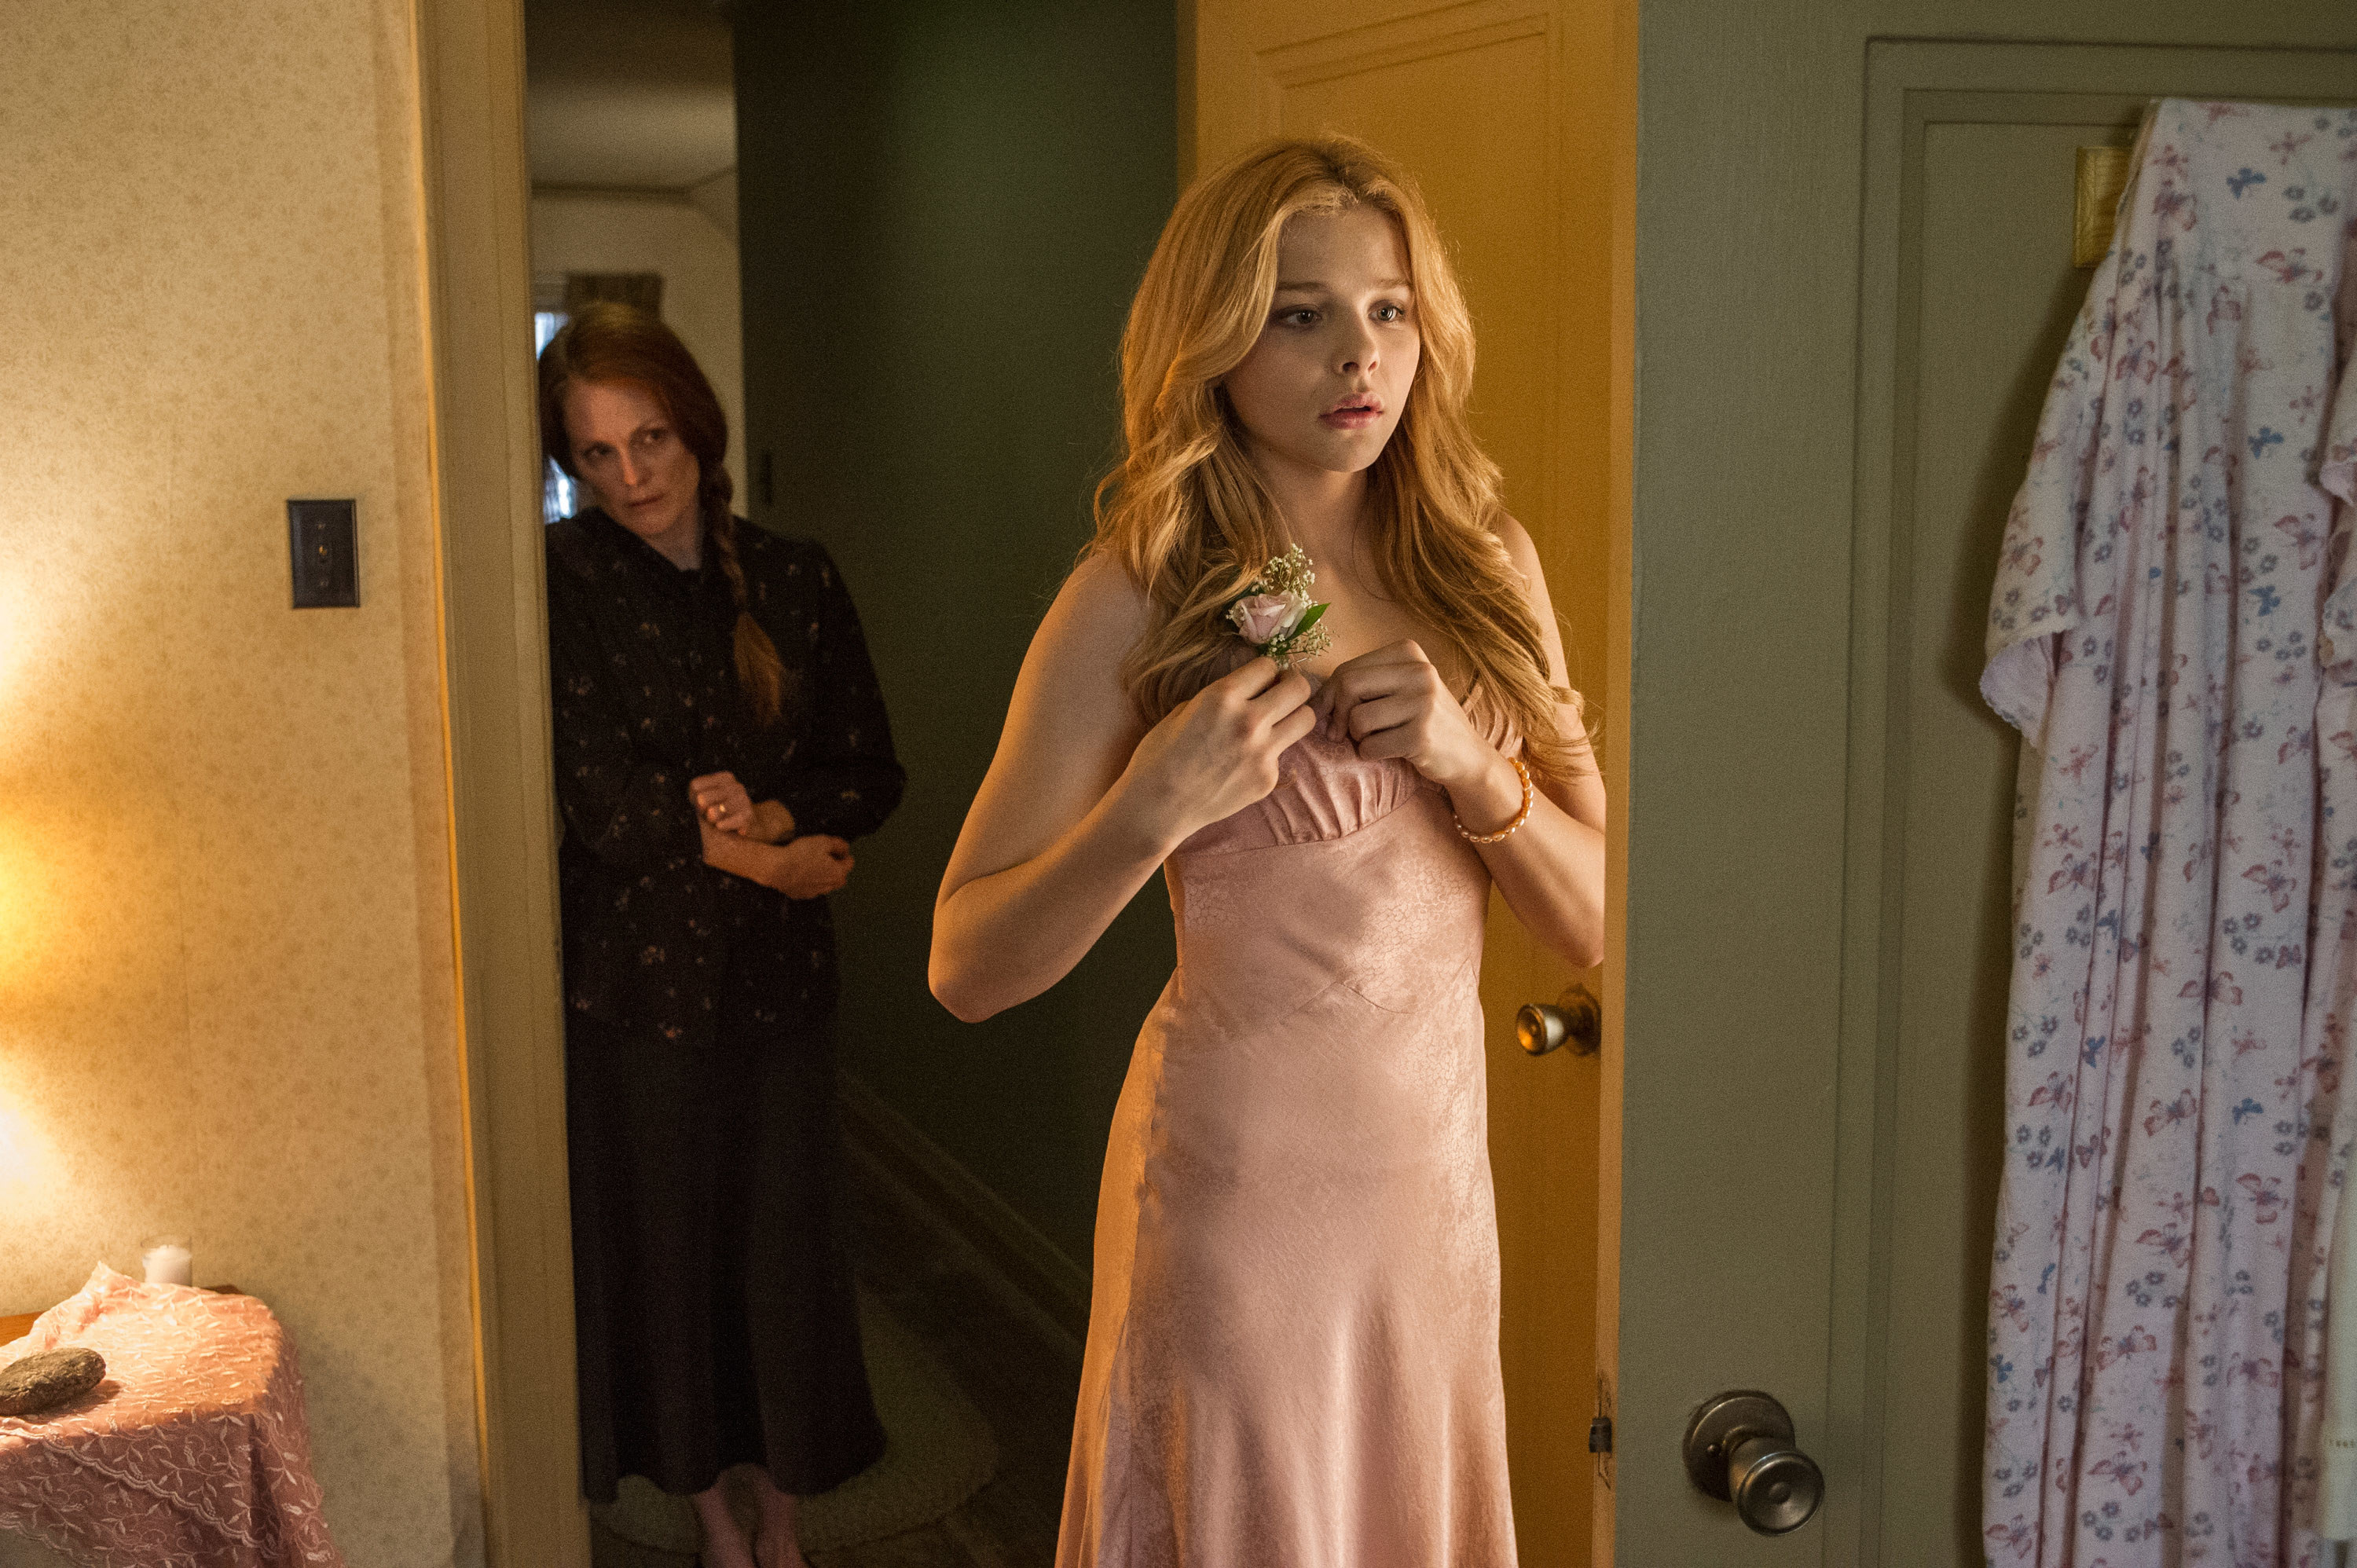 Carrie, as played by Chloe Grace Moretz, gets ready for prom while her mother watches